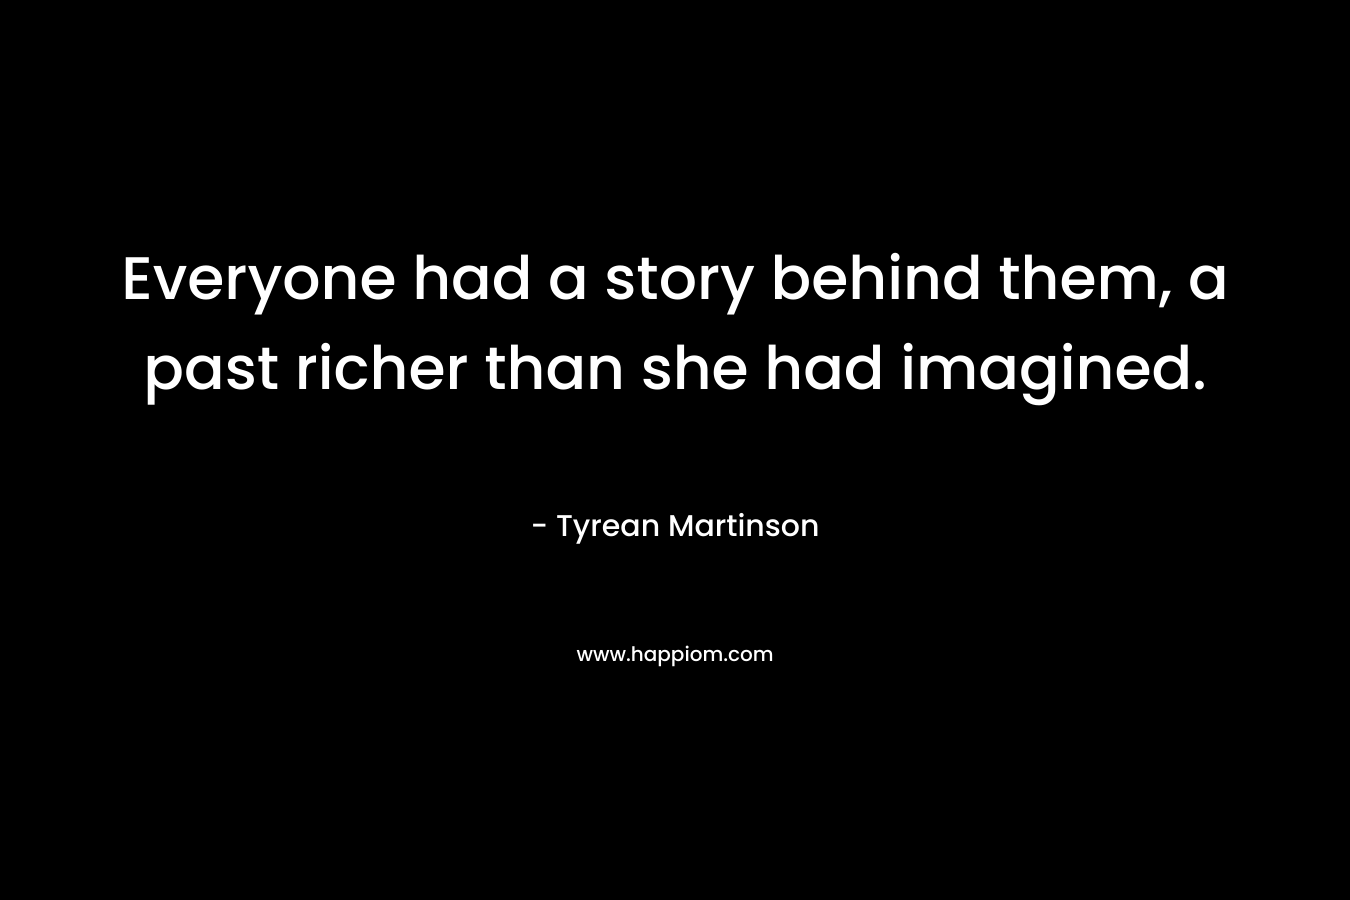 Everyone had a story behind them, a past richer than she had imagined. – Tyrean Martinson